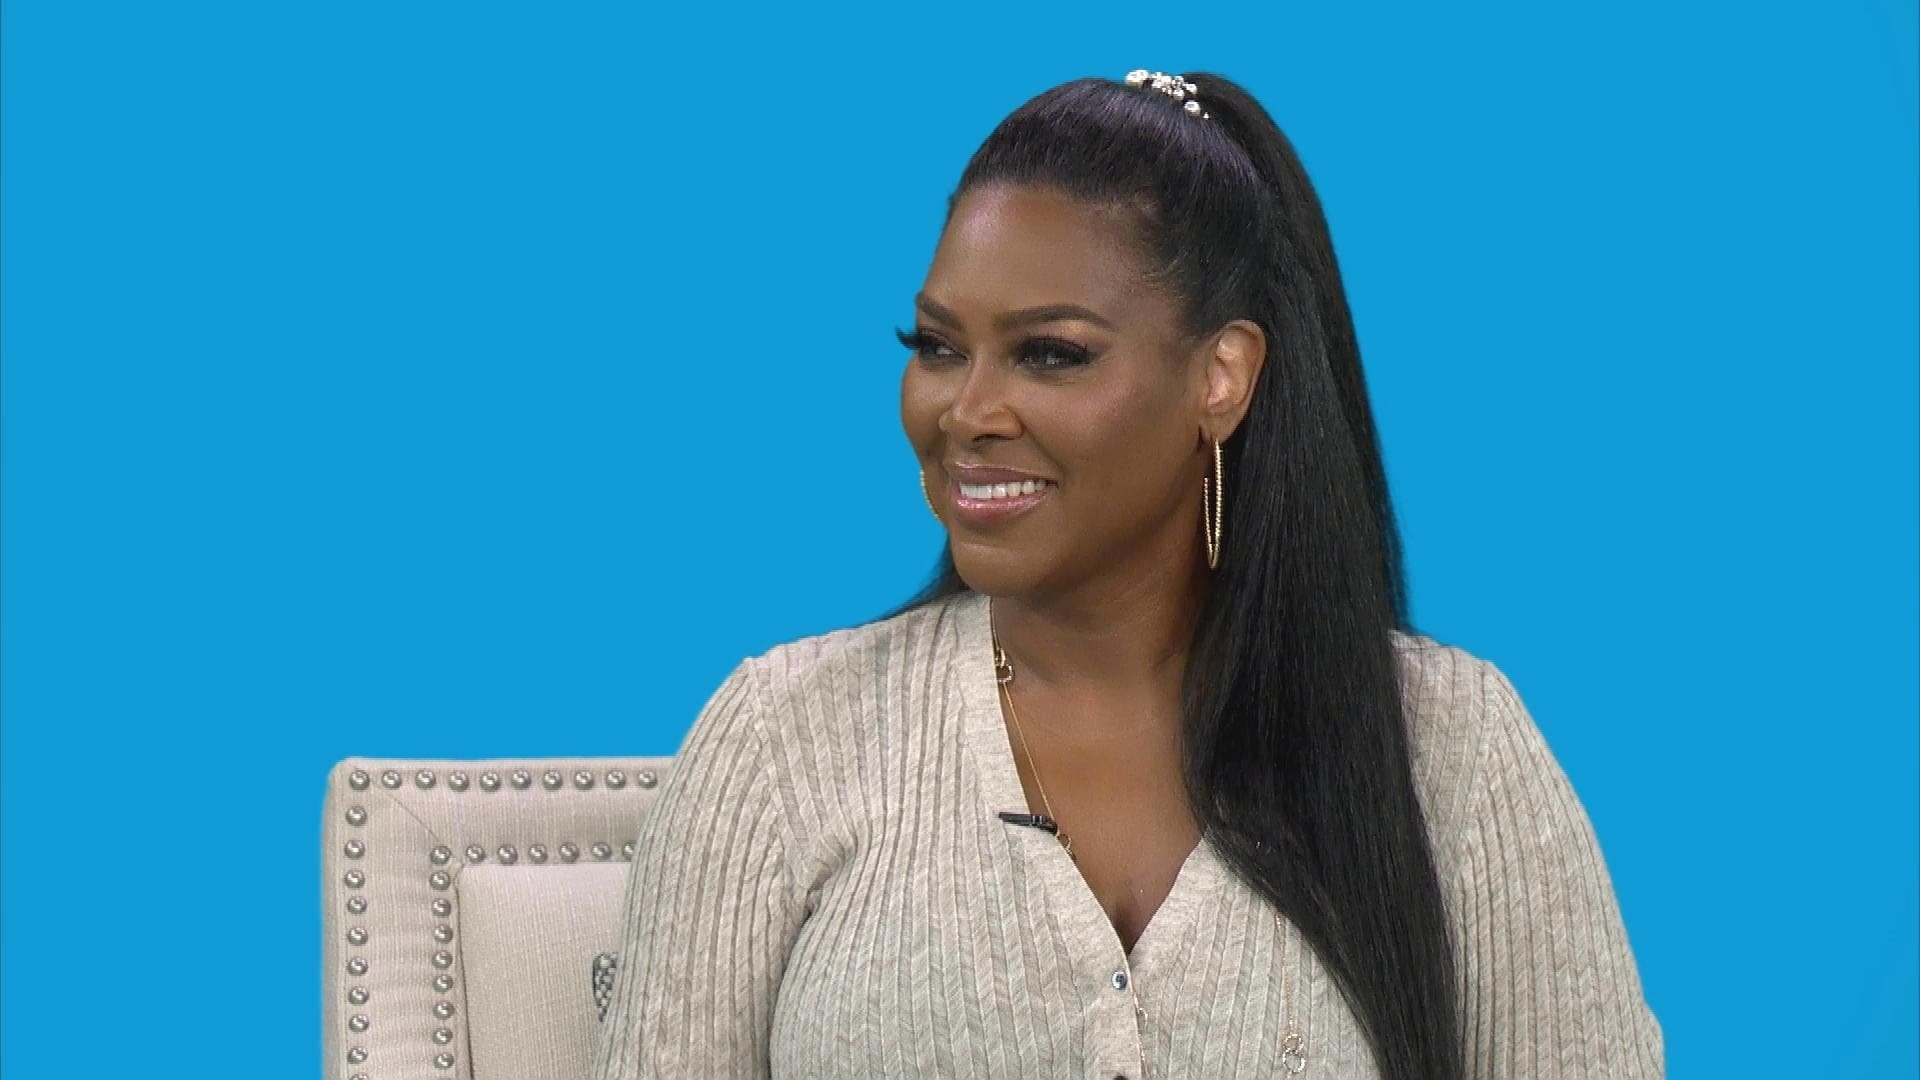 Kenya Moore Shares Precious Information For Families Who Are Suffering From Infertility